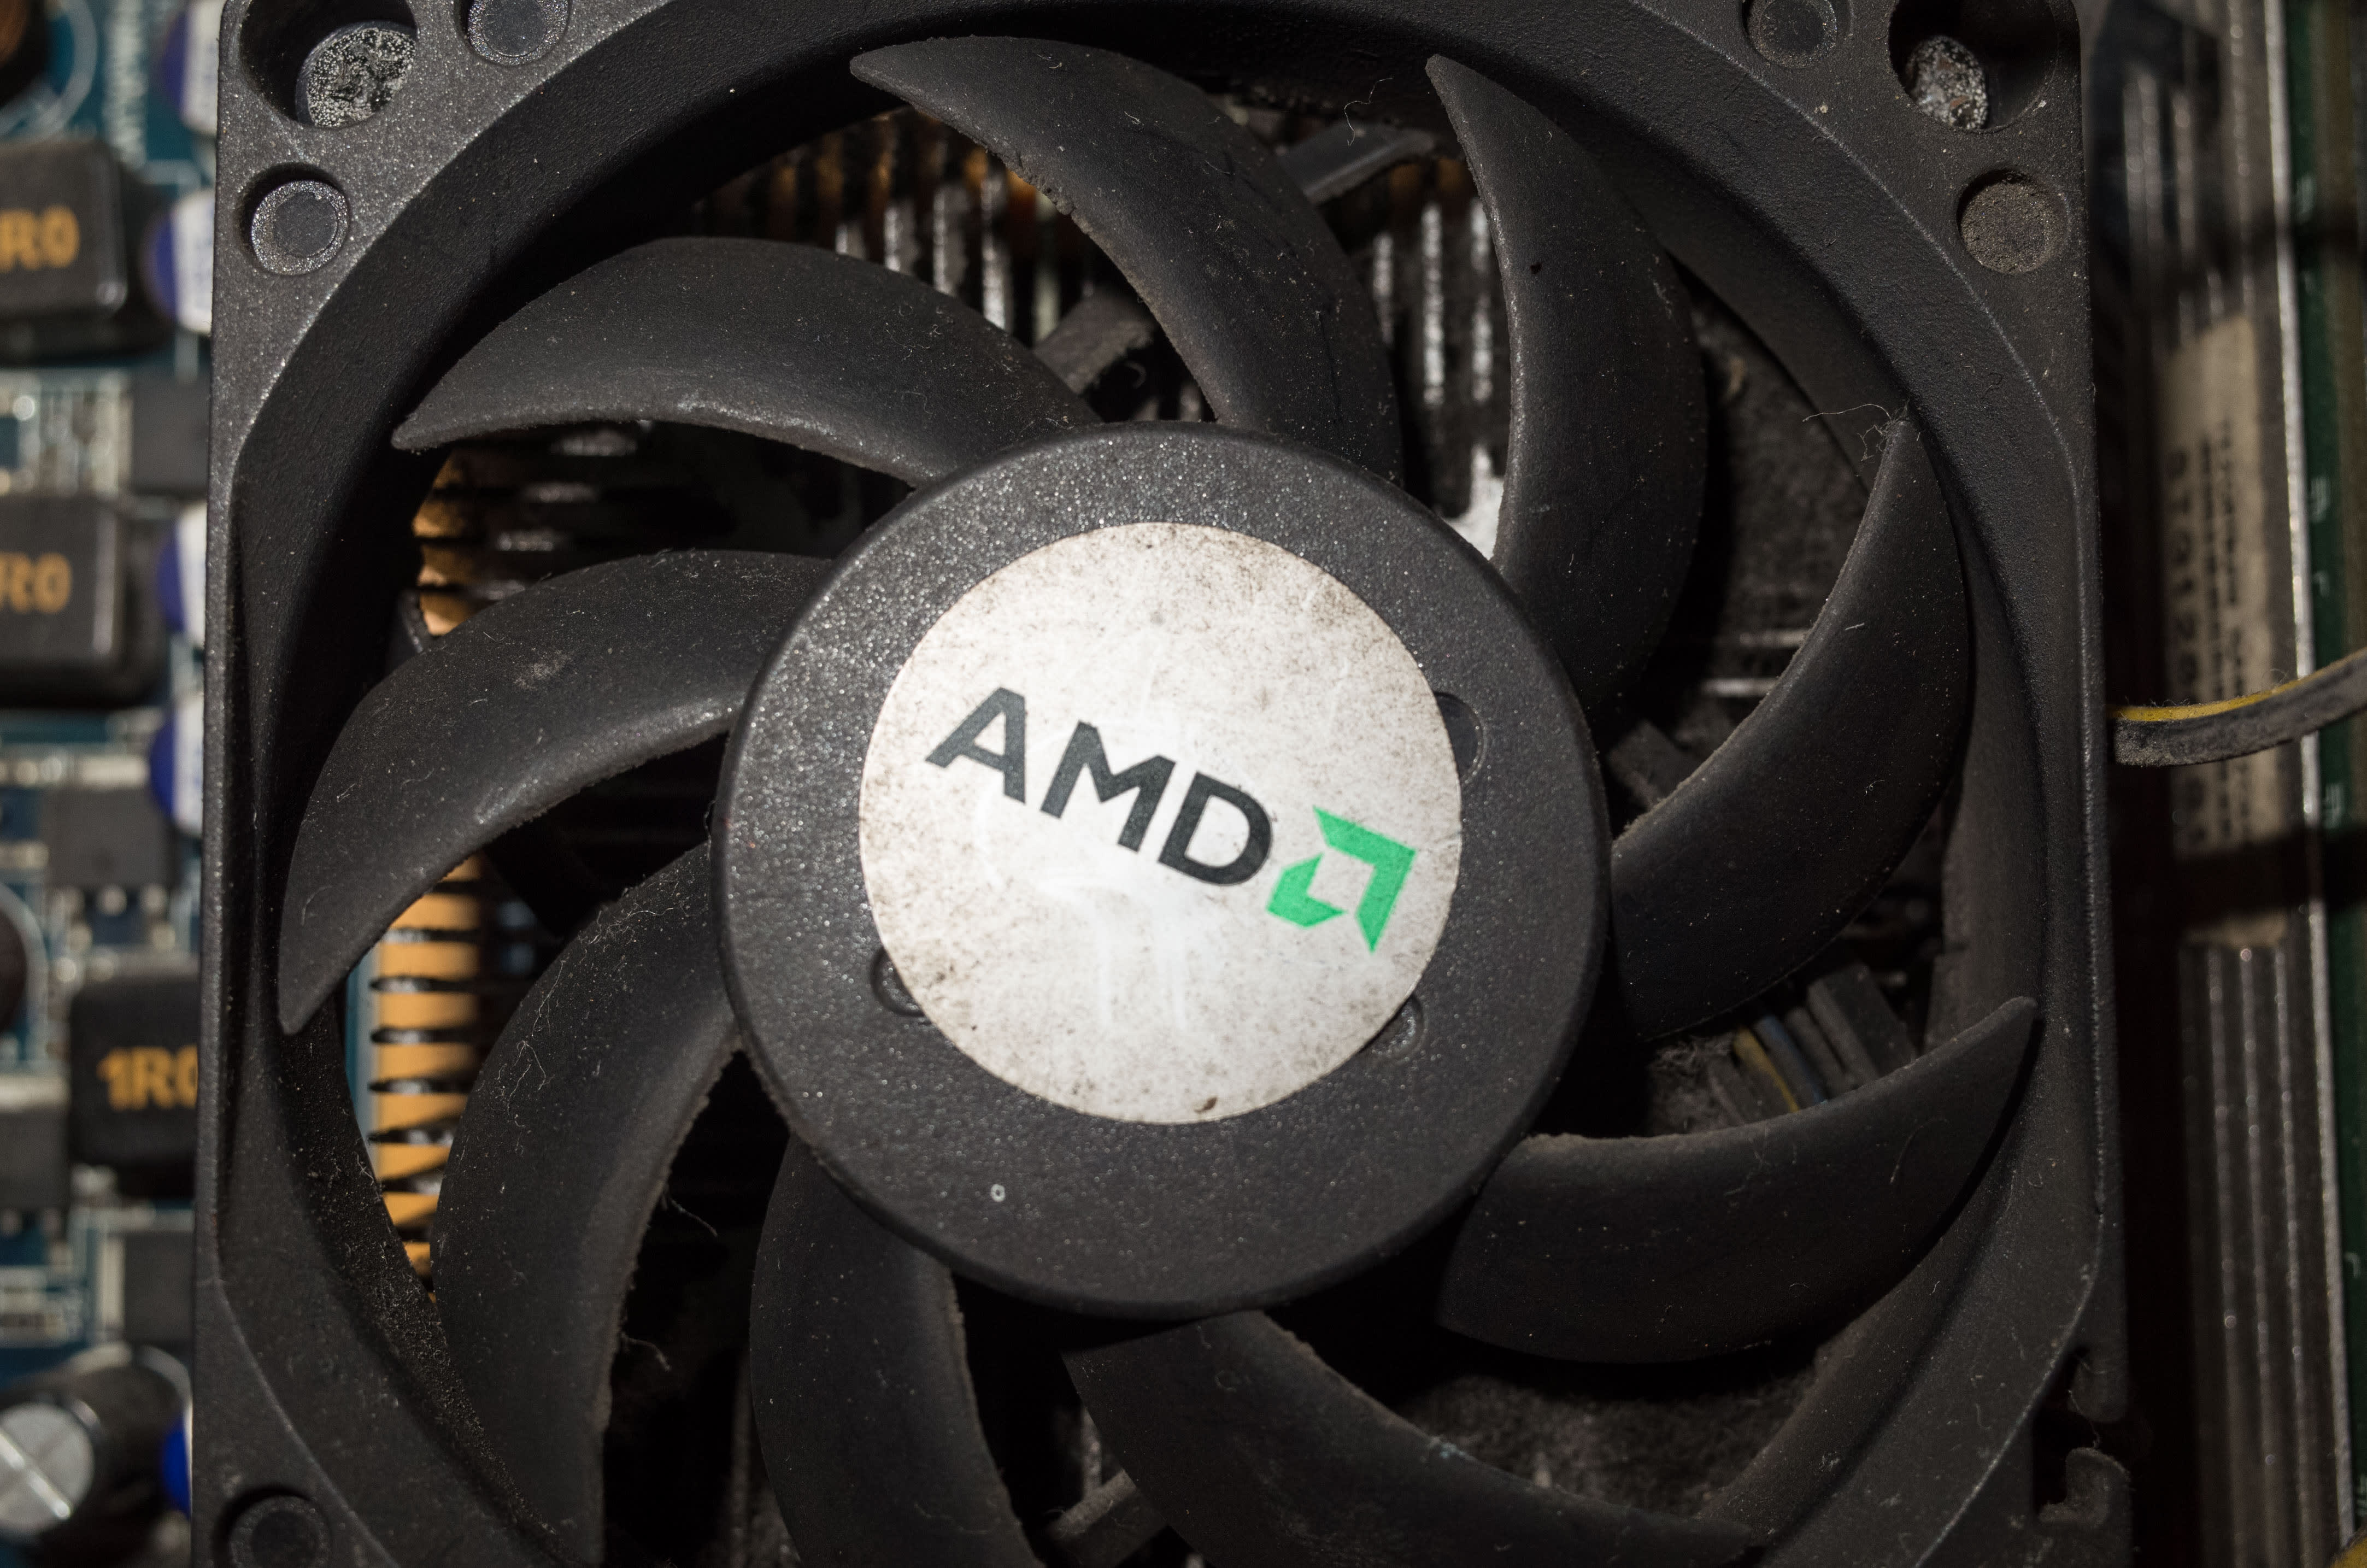 AMD can ride AI wave to grab bigger market share from rivals, says Bank of America